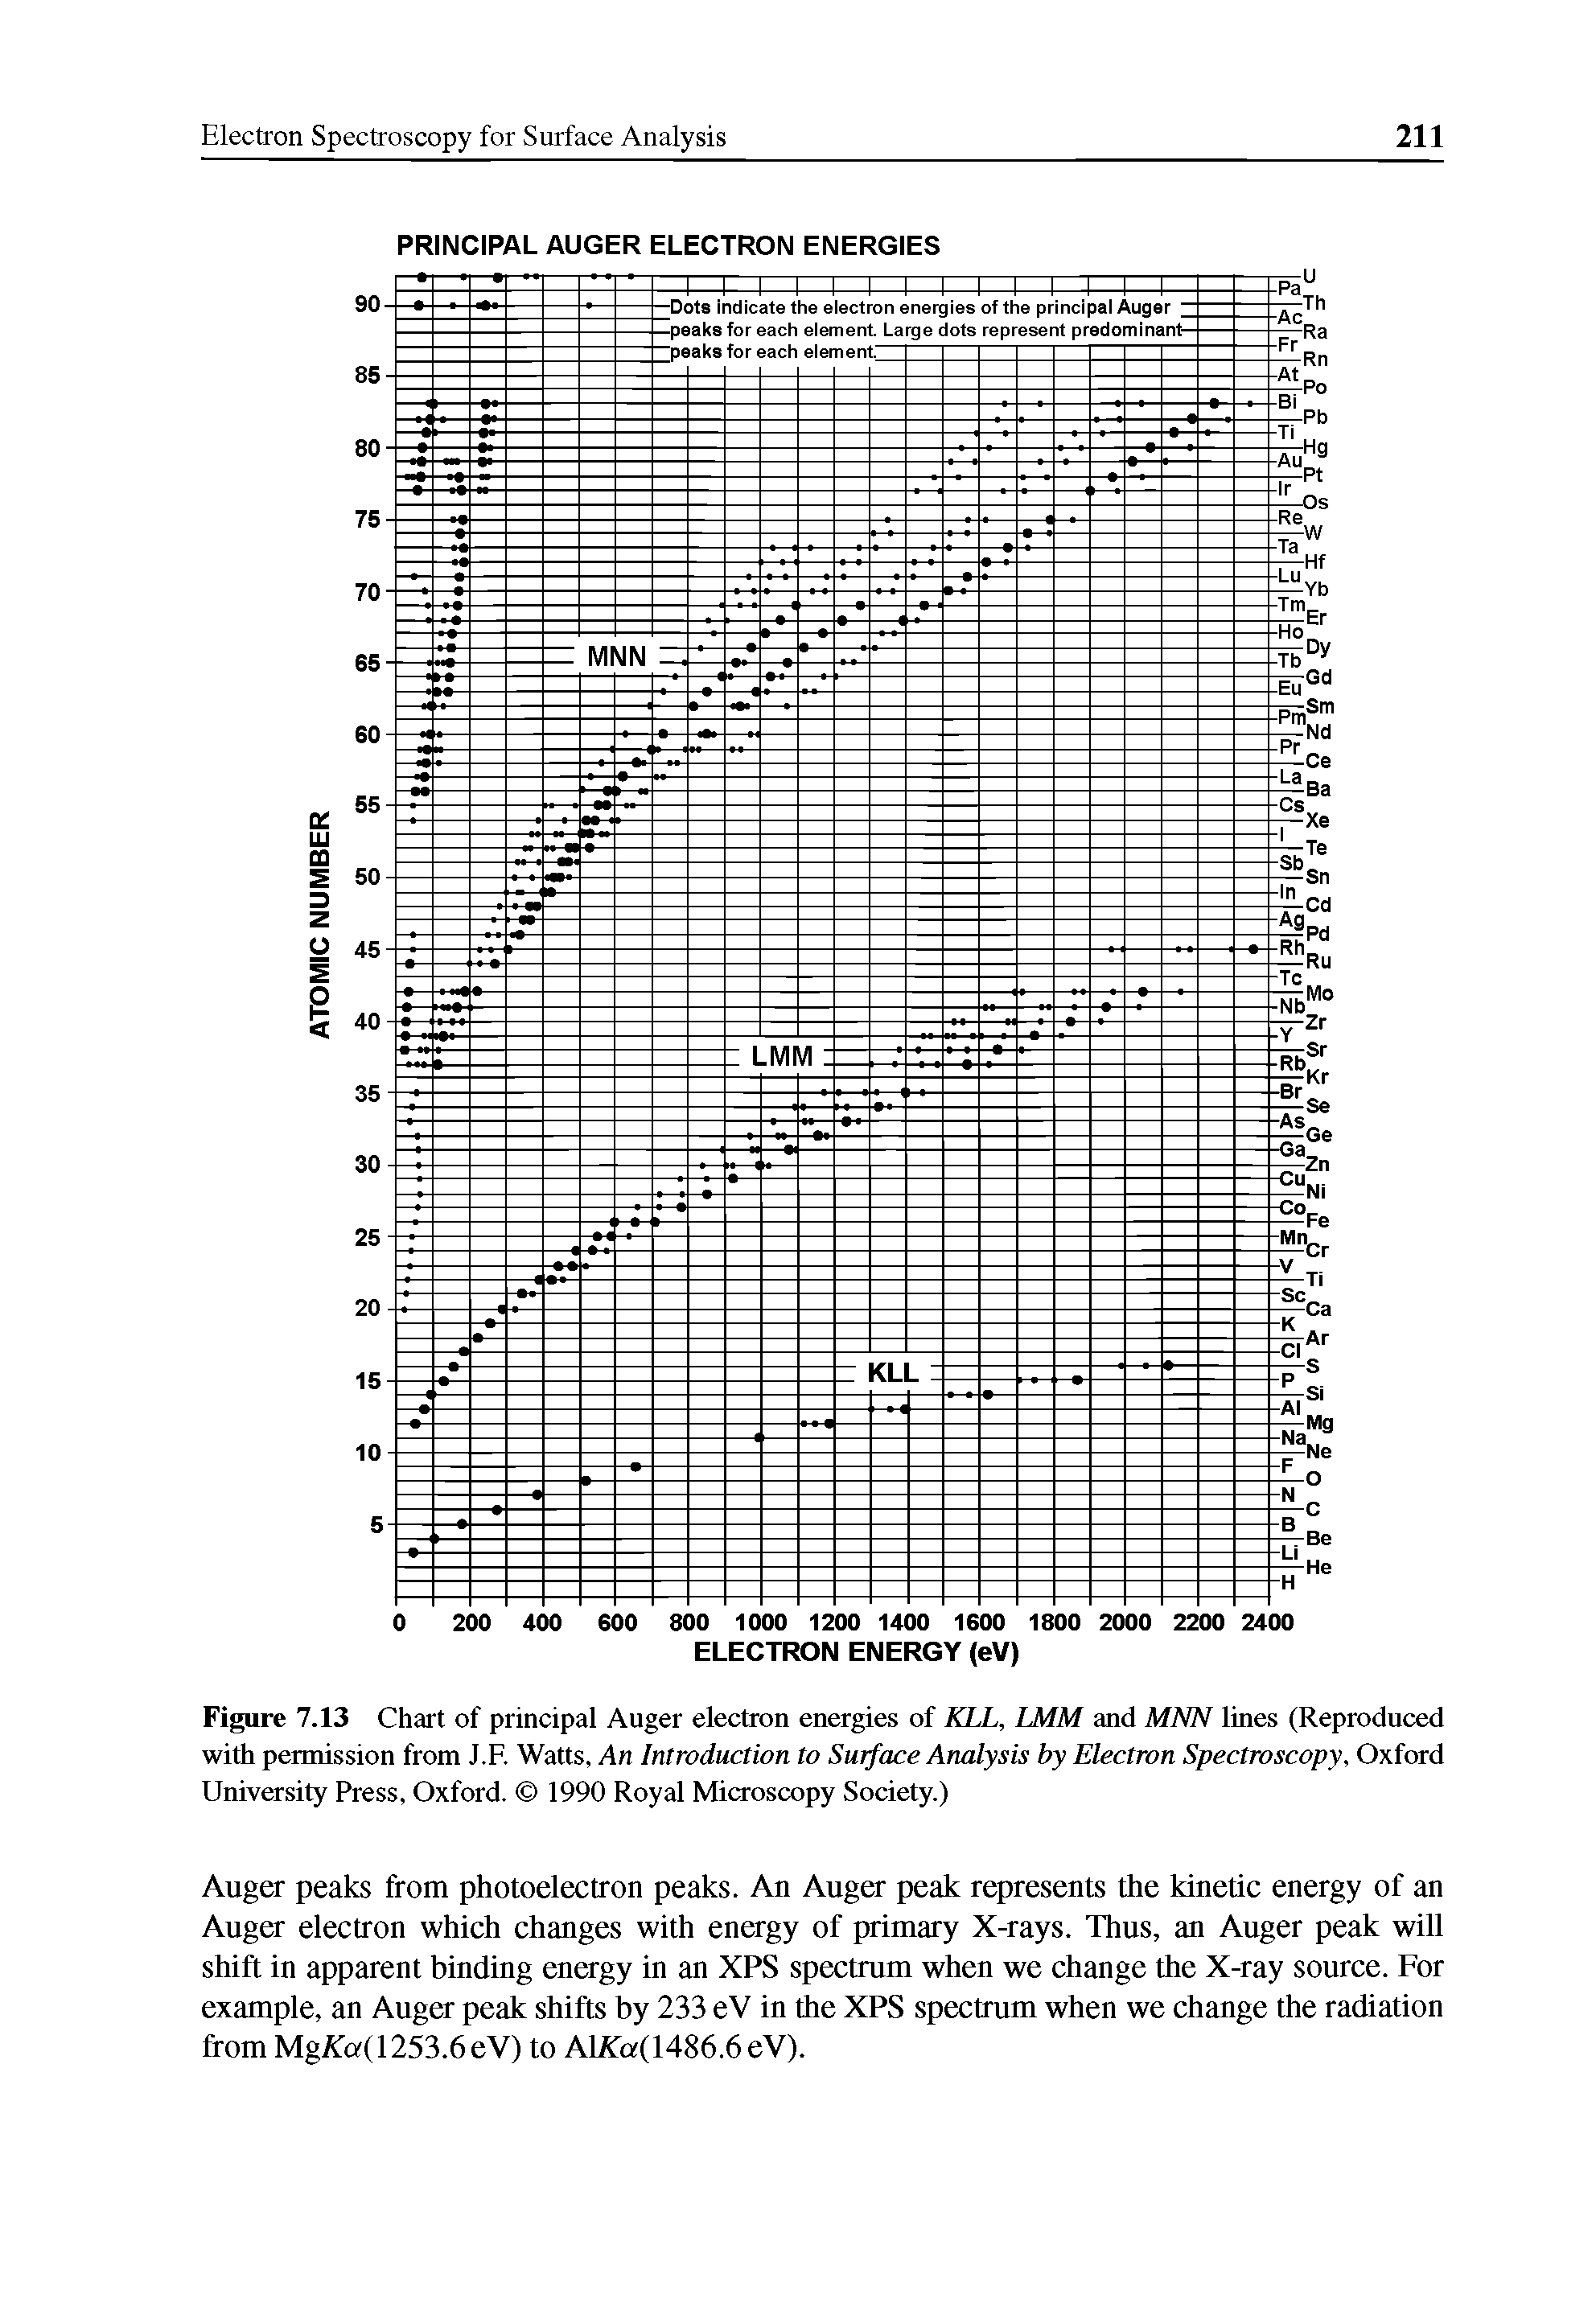 Figure 7.13 Chart of principal Auger electron energies of KLL, LMM and MNN lines (Reproduced with permission from J.F. Watts, An Introduction to Surface Analysis by Electron Spectroscopy, Oxford University Press, Oxford. 1990 Royal Microscopy Society.)...